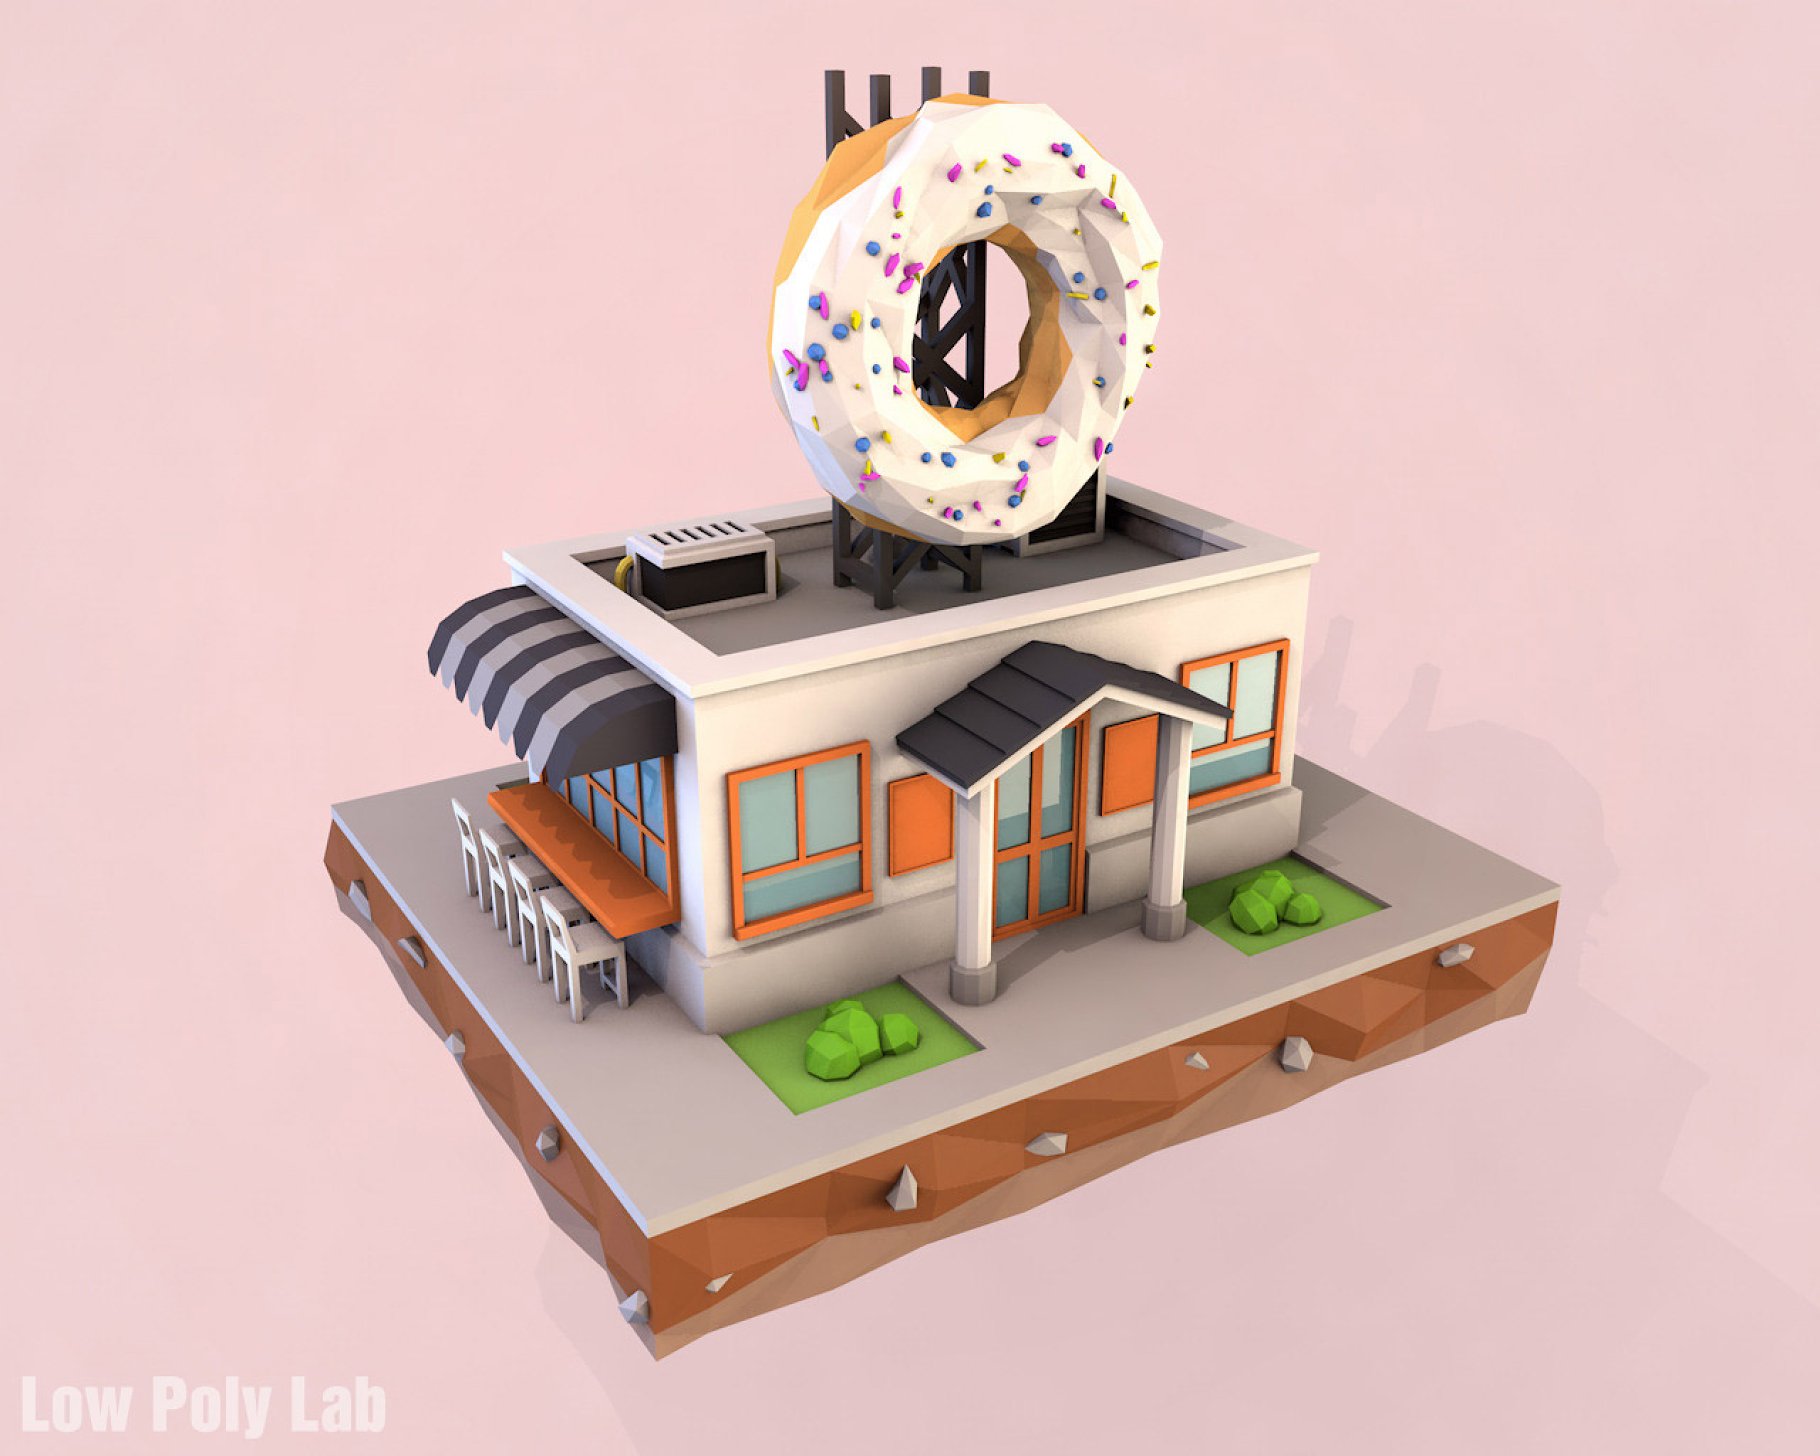 Donut and buildings.